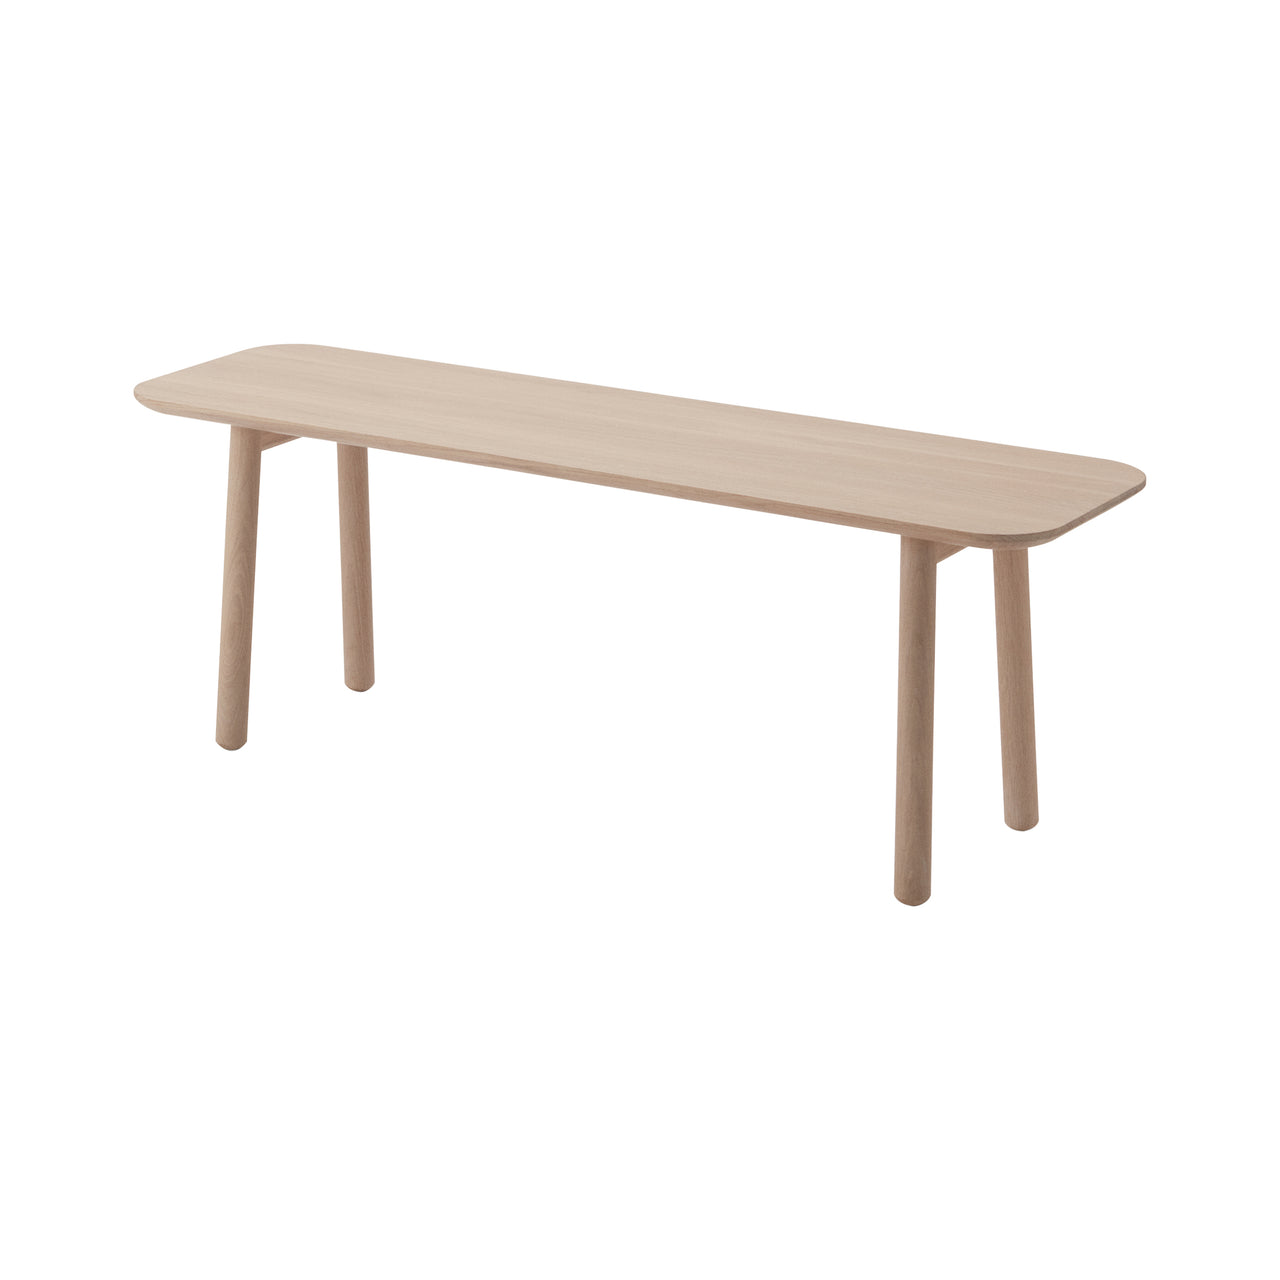 Hven Bench: Without Cushion + White Oiled Oak